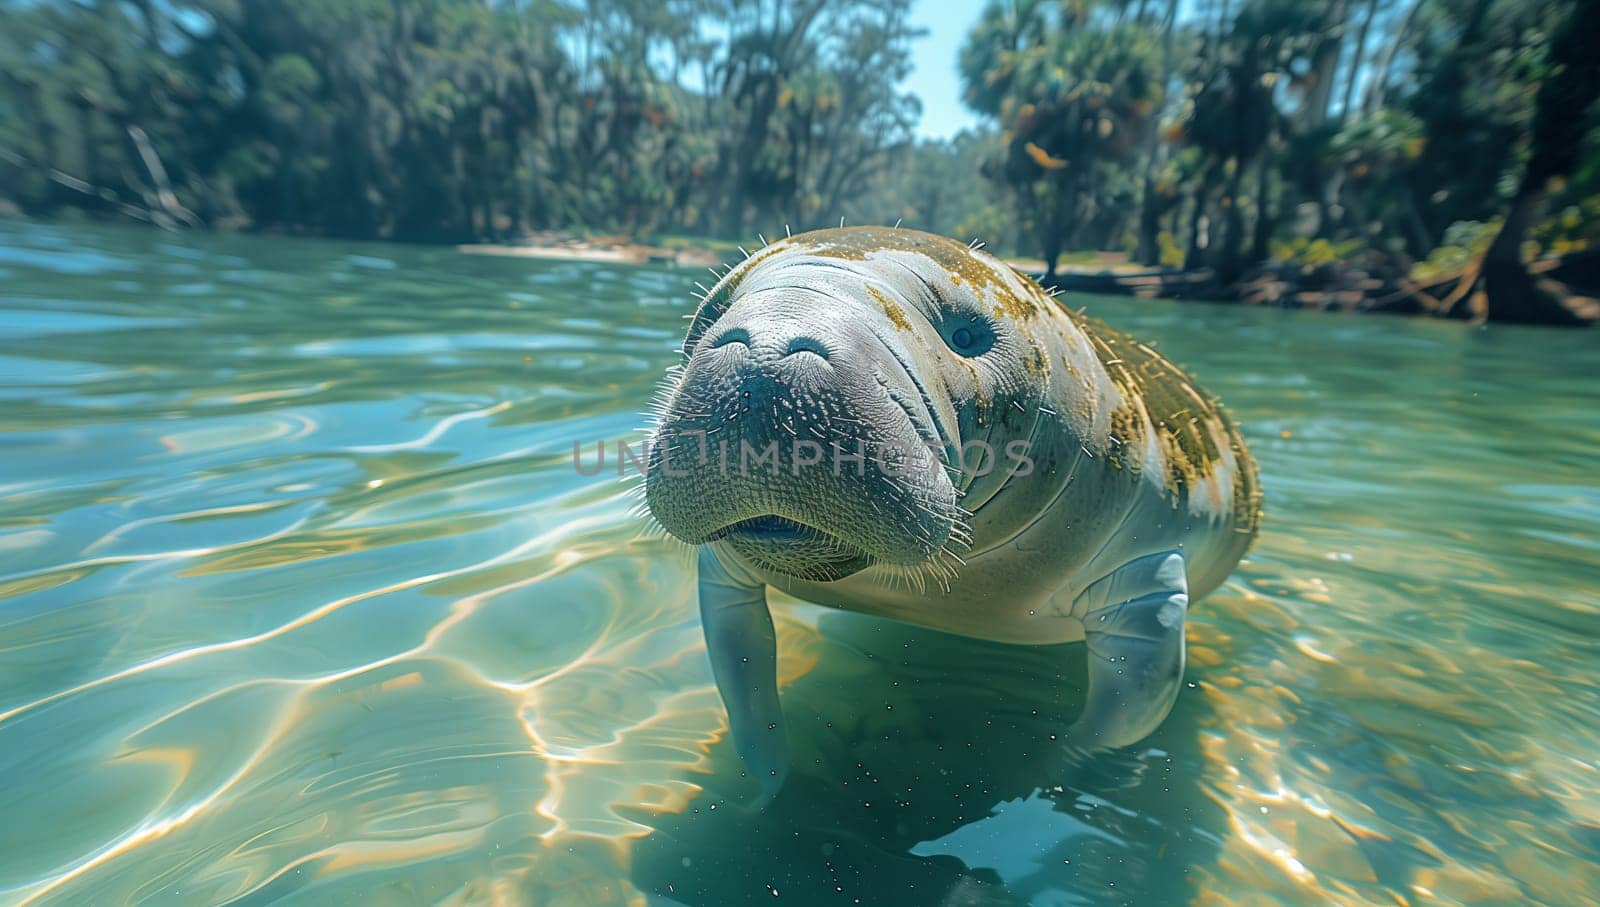 A manatee is gracefully swimming in the river, its gaze fixed on the camera. Surrounded by the beauty of nature, this aquatic mammal enjoys its underwater habitat